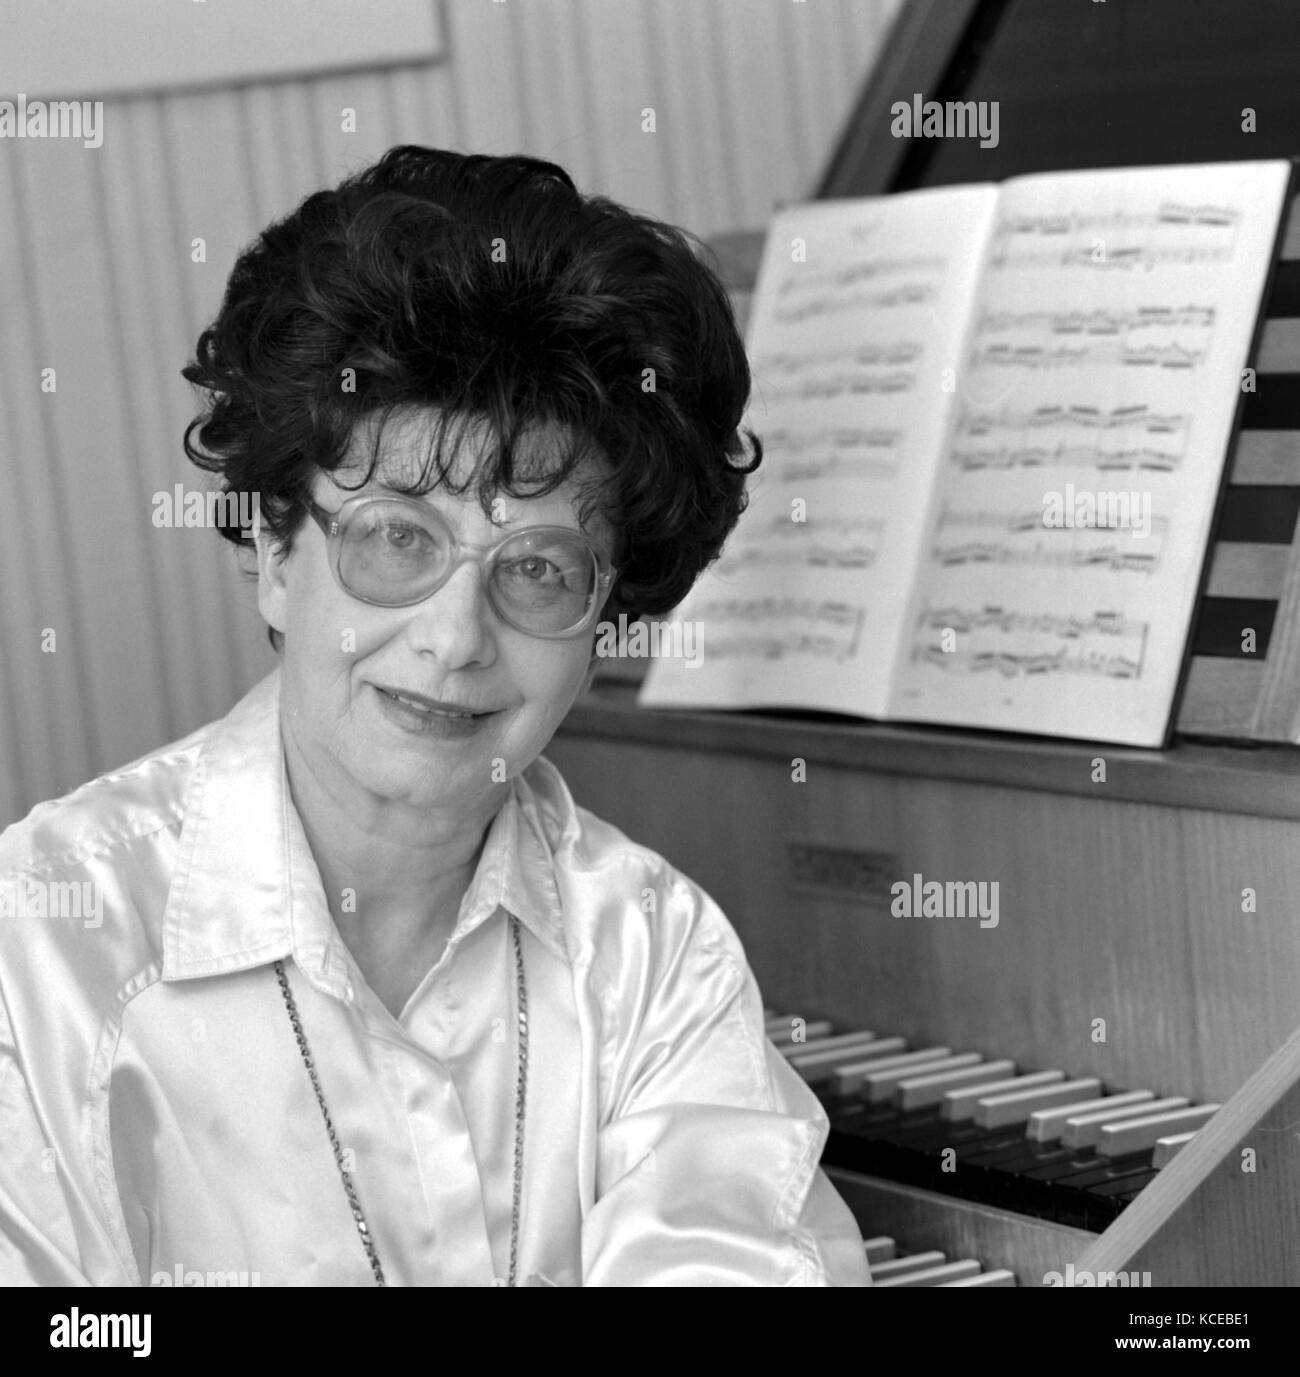 FILE Harpsichordist Zuzana Ruzickova in Prague, Czech Republic, April 27, 1989. Ruzickova died after a short serious illness in hospital at the age of 90 years today, September 27, 2017. Ruzickova, who was often referred to as the first lady of harpsichord, was the wife of composer Kalabis (1923-2006). She won fame for her performance of Johann Sebastian Bach. She recorded Bach's complete works on 35 CDs. Ruzickova, a soloist of the Czech Philharmonic in 1979-1990, received a number of music awards. Zuzana Ruzickova, born on January 14, 1927, started playing the piano at the age of nine. Stock Photo